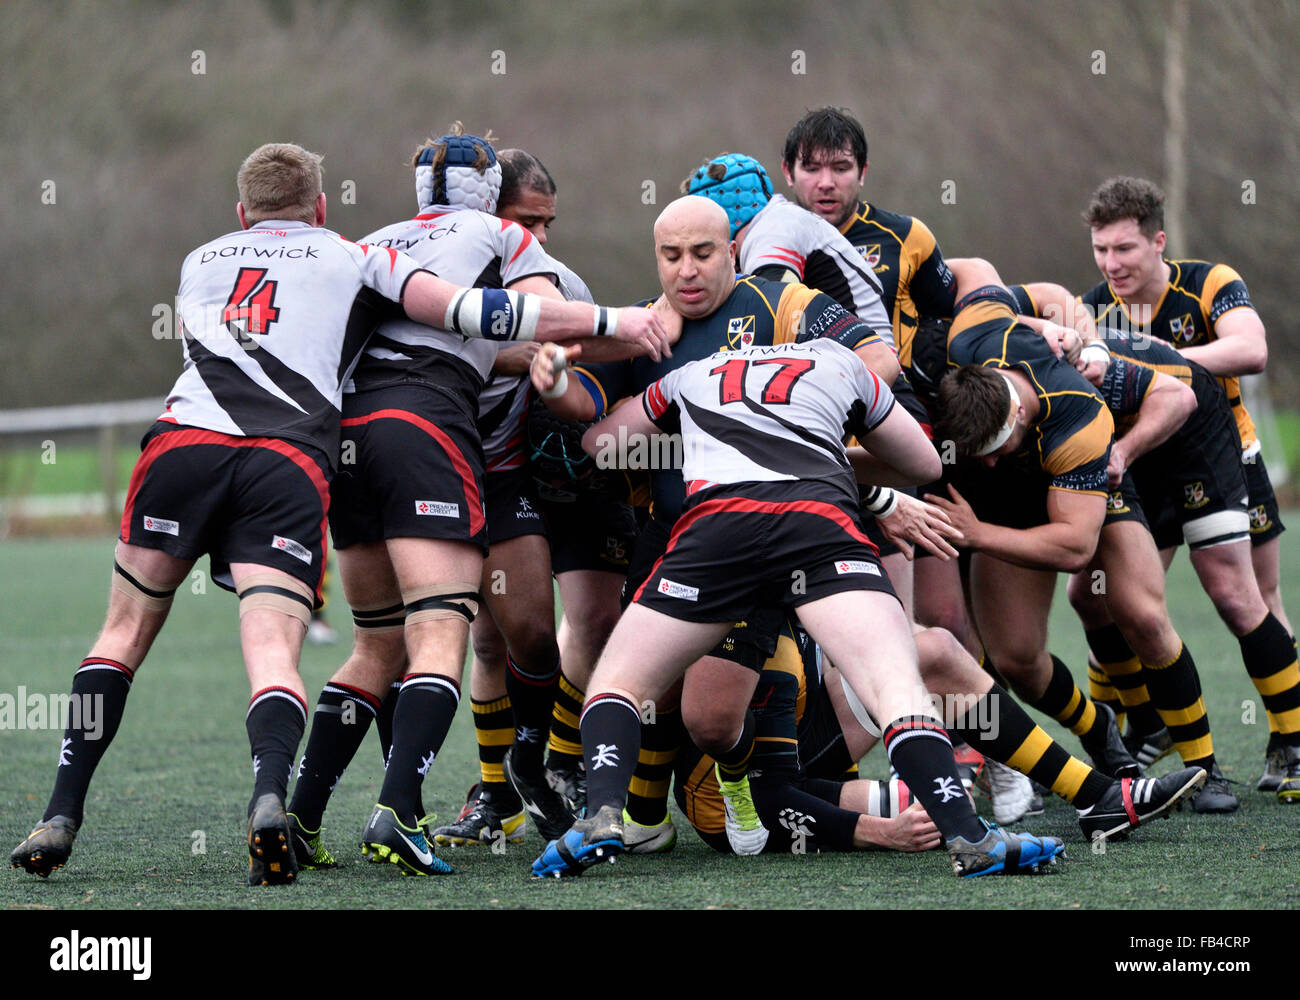 Burnage  9th January 2016 Players battle for the ball n a match in which Burnage Rugby Club were attempting to move from bottom place in the league but were heavily defeated by Ilkley, who were third bottom. Credit:  John Fryer/Alamy Live News Stock Photo